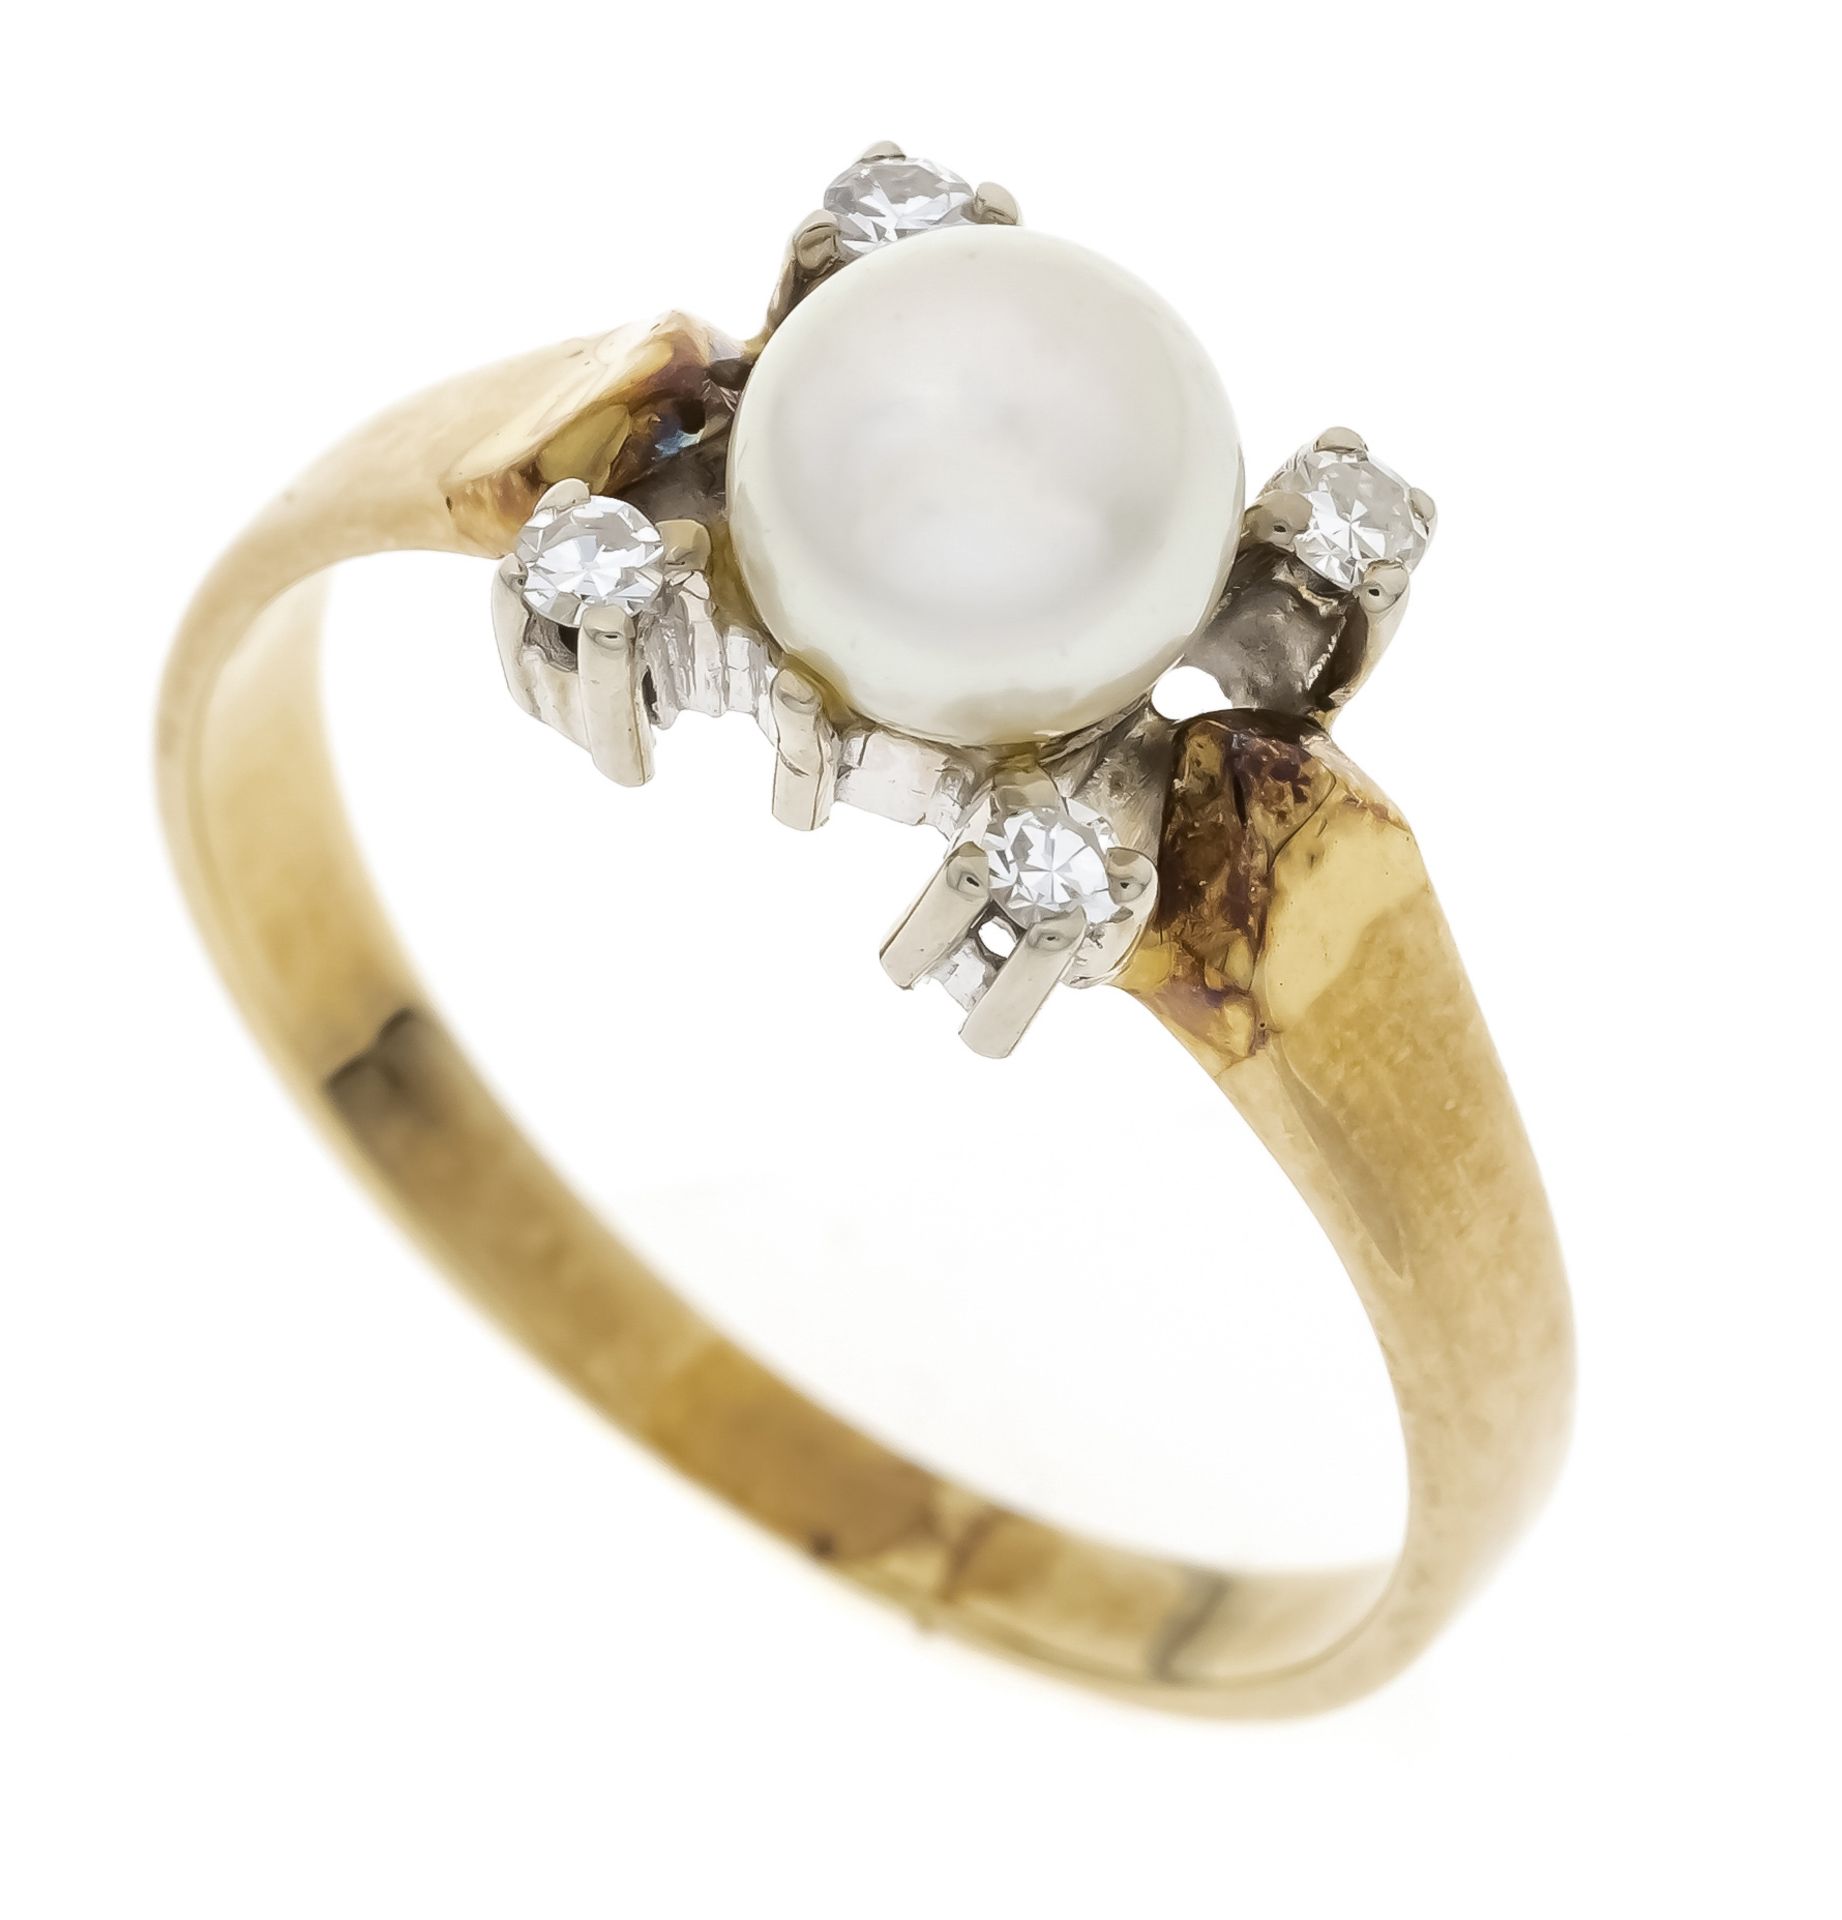 Pearl-cut diamond ring GG/WG 585/000 with one white Akoya pearl 6,2 mm and 4 brilliant-cut diamonds,